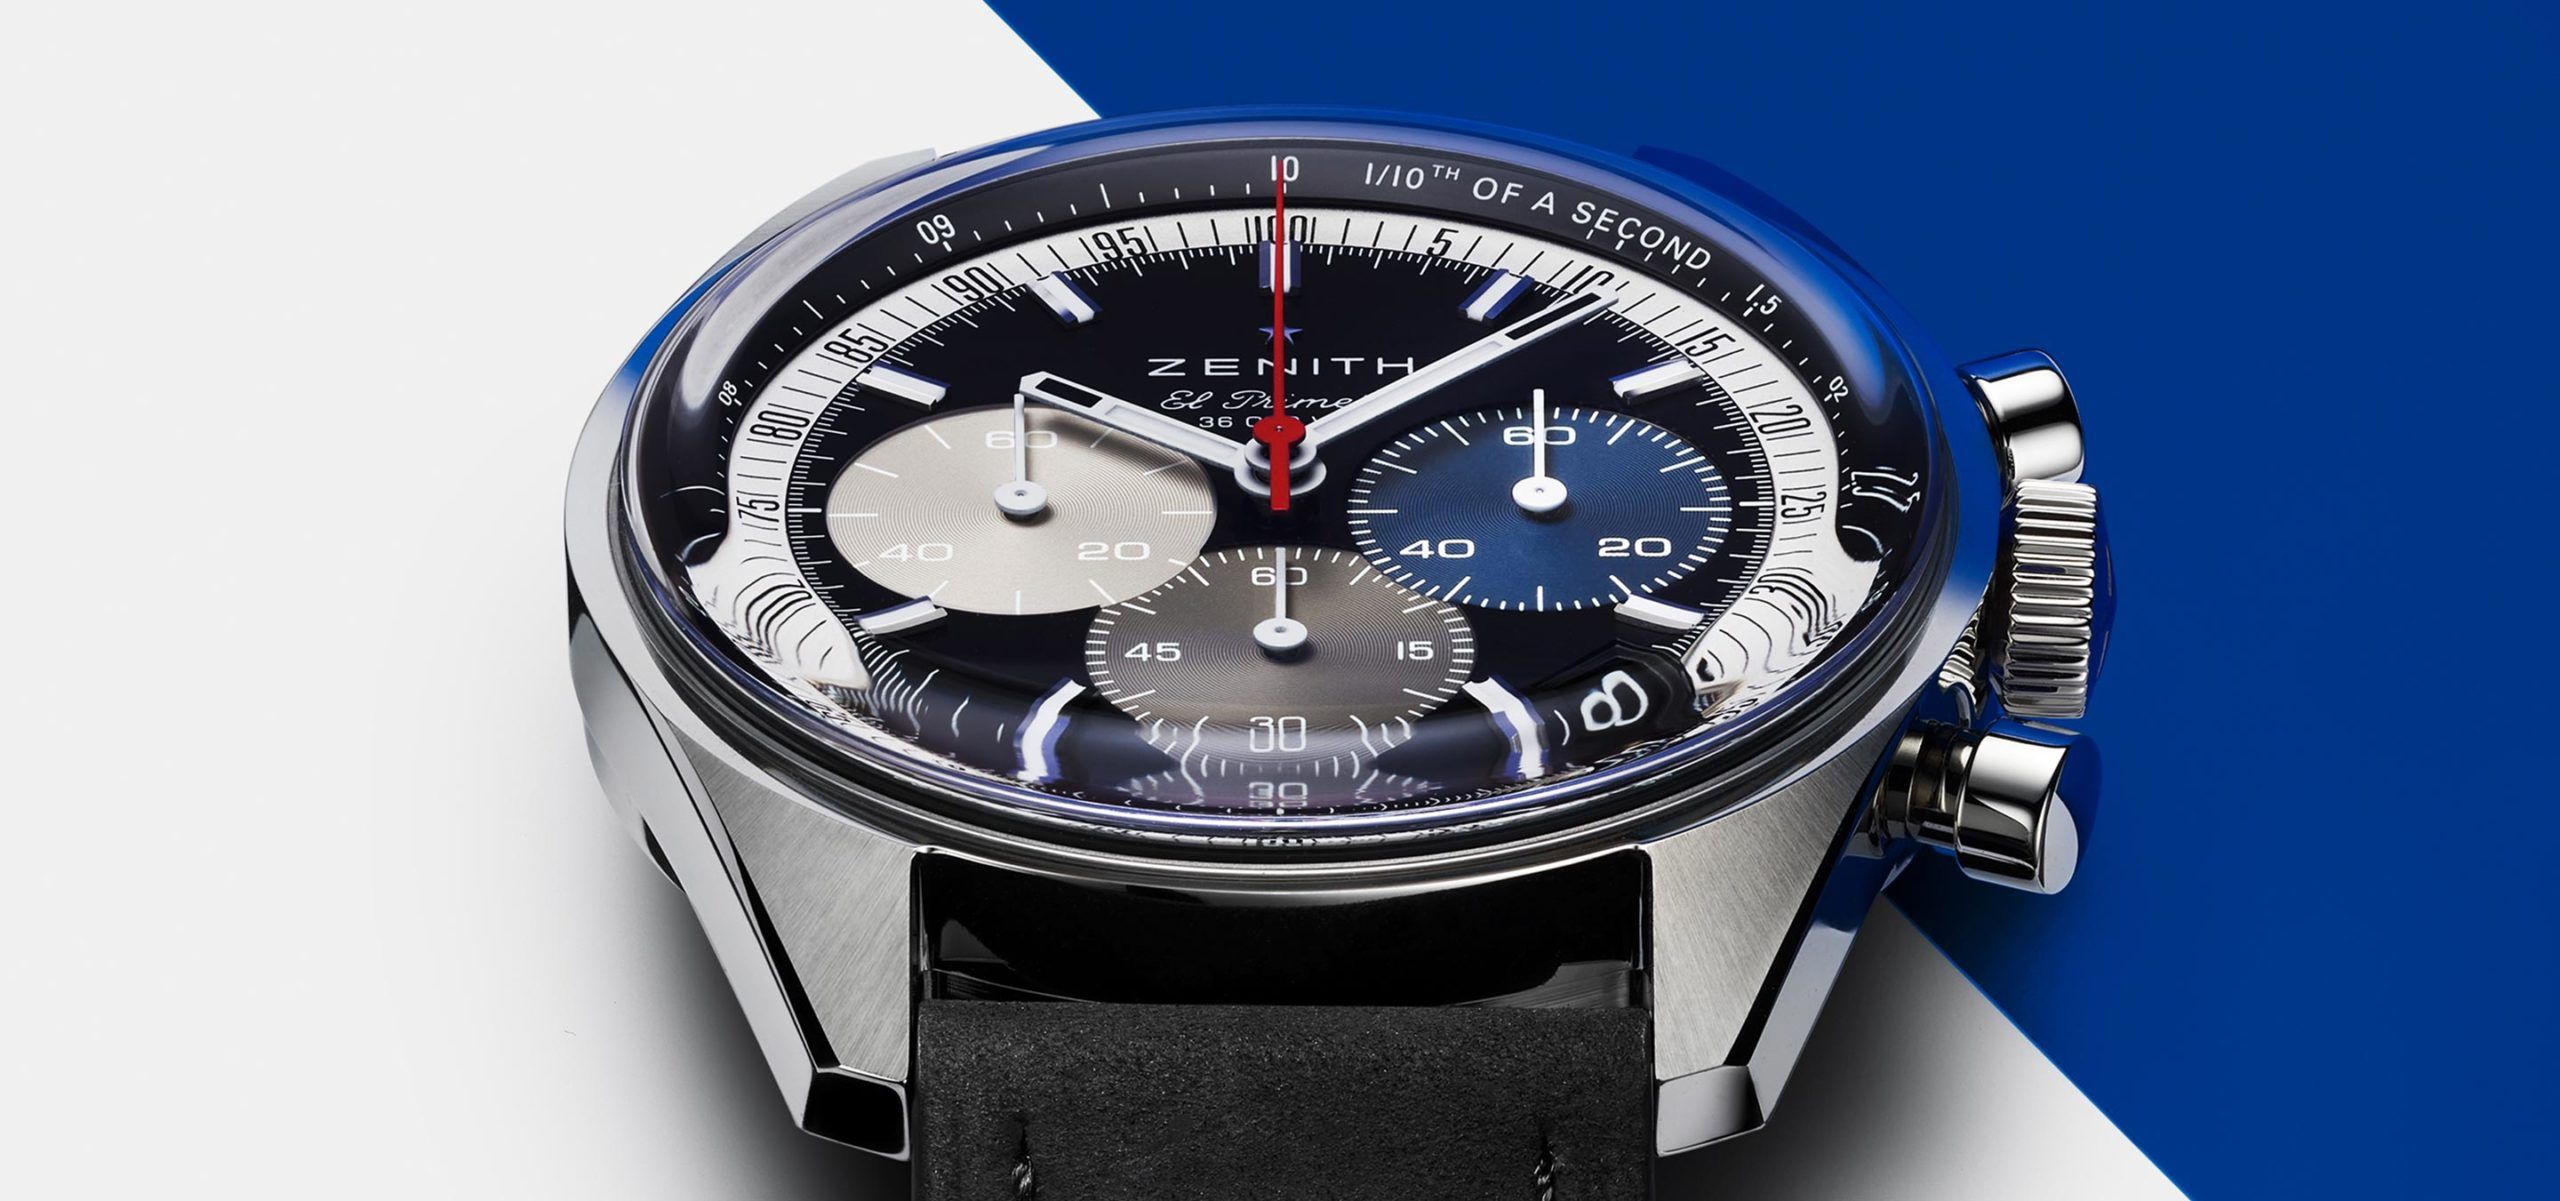 Back In Black: The Zenith Chronomaster Original Returns With A Black Dial And Tricolour Counters